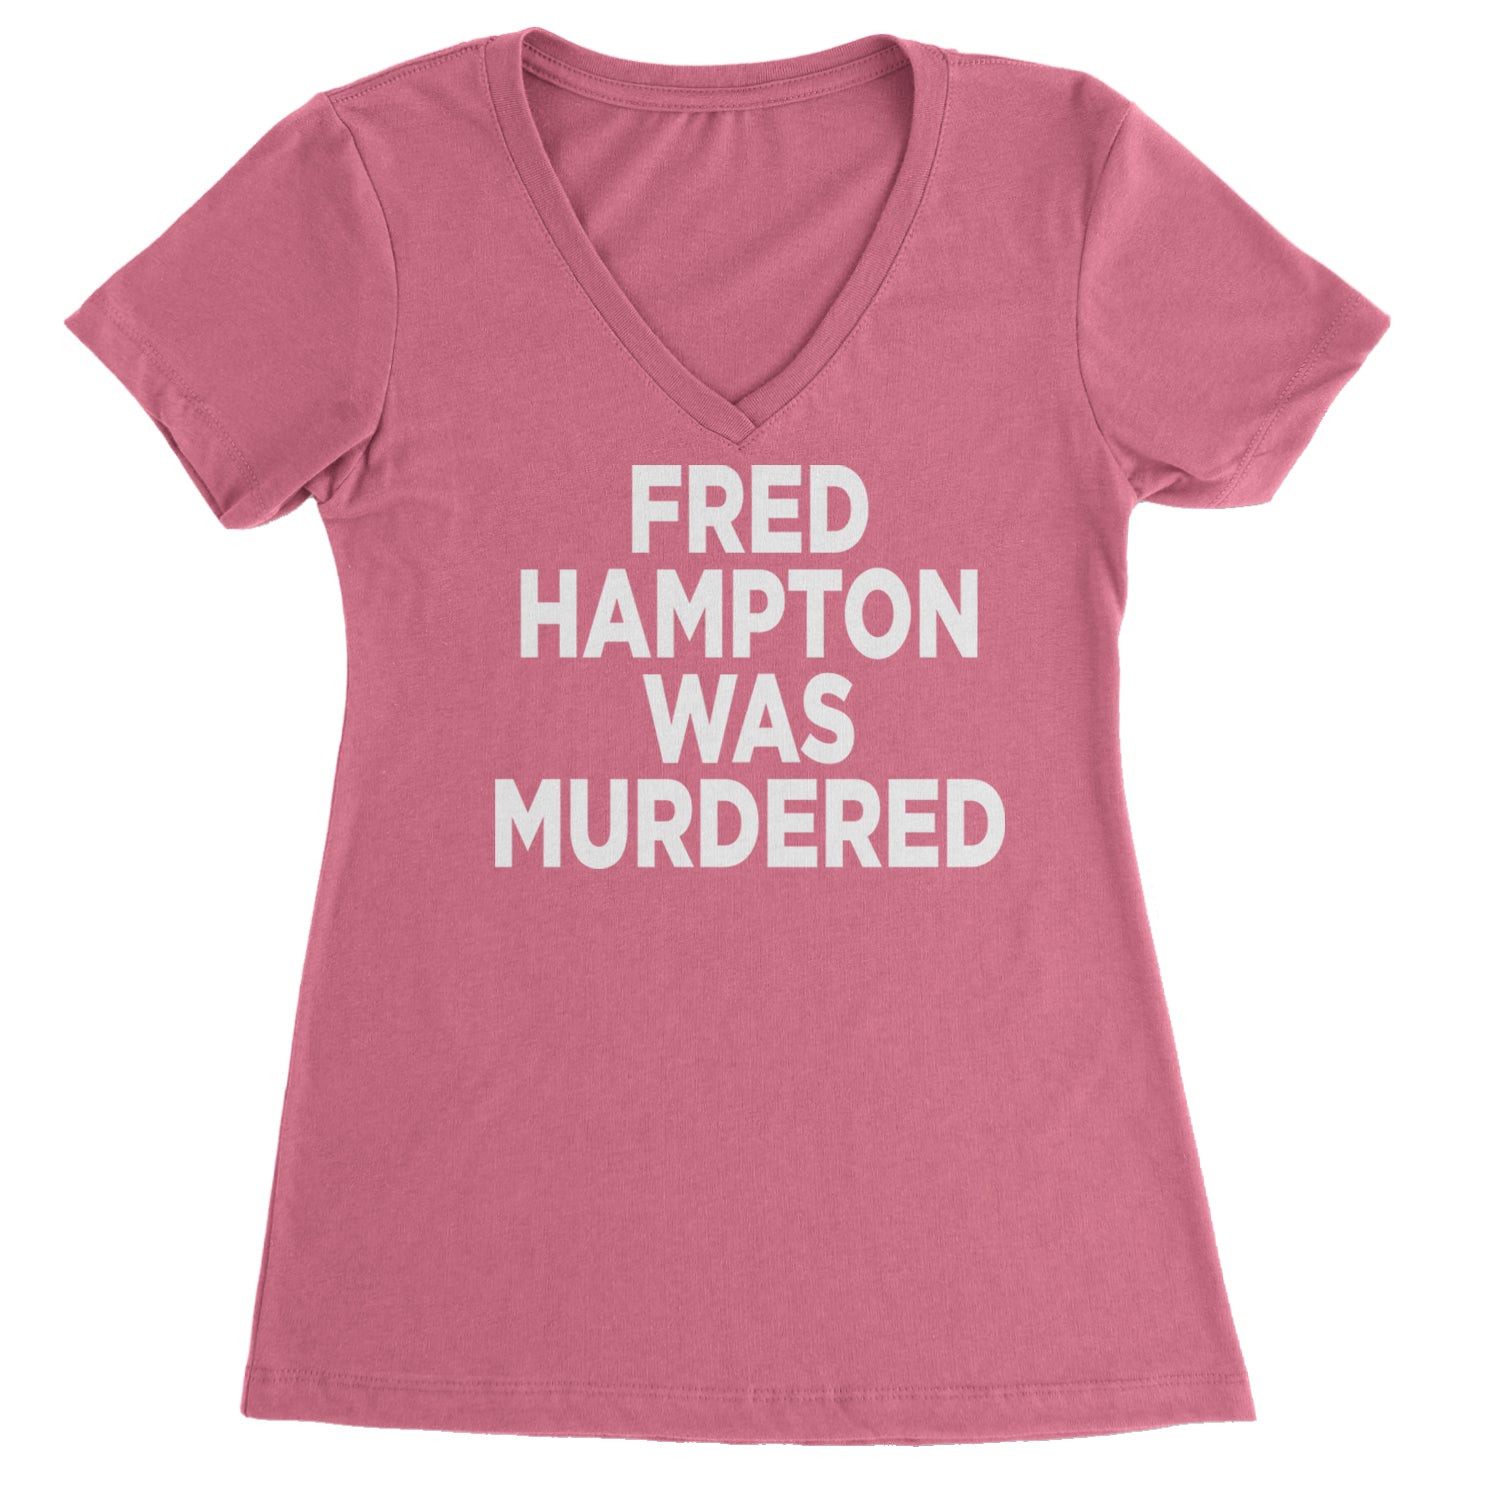 Fred Hampton Was Murdered Ladies V-Neck T-shirt Hot Pink